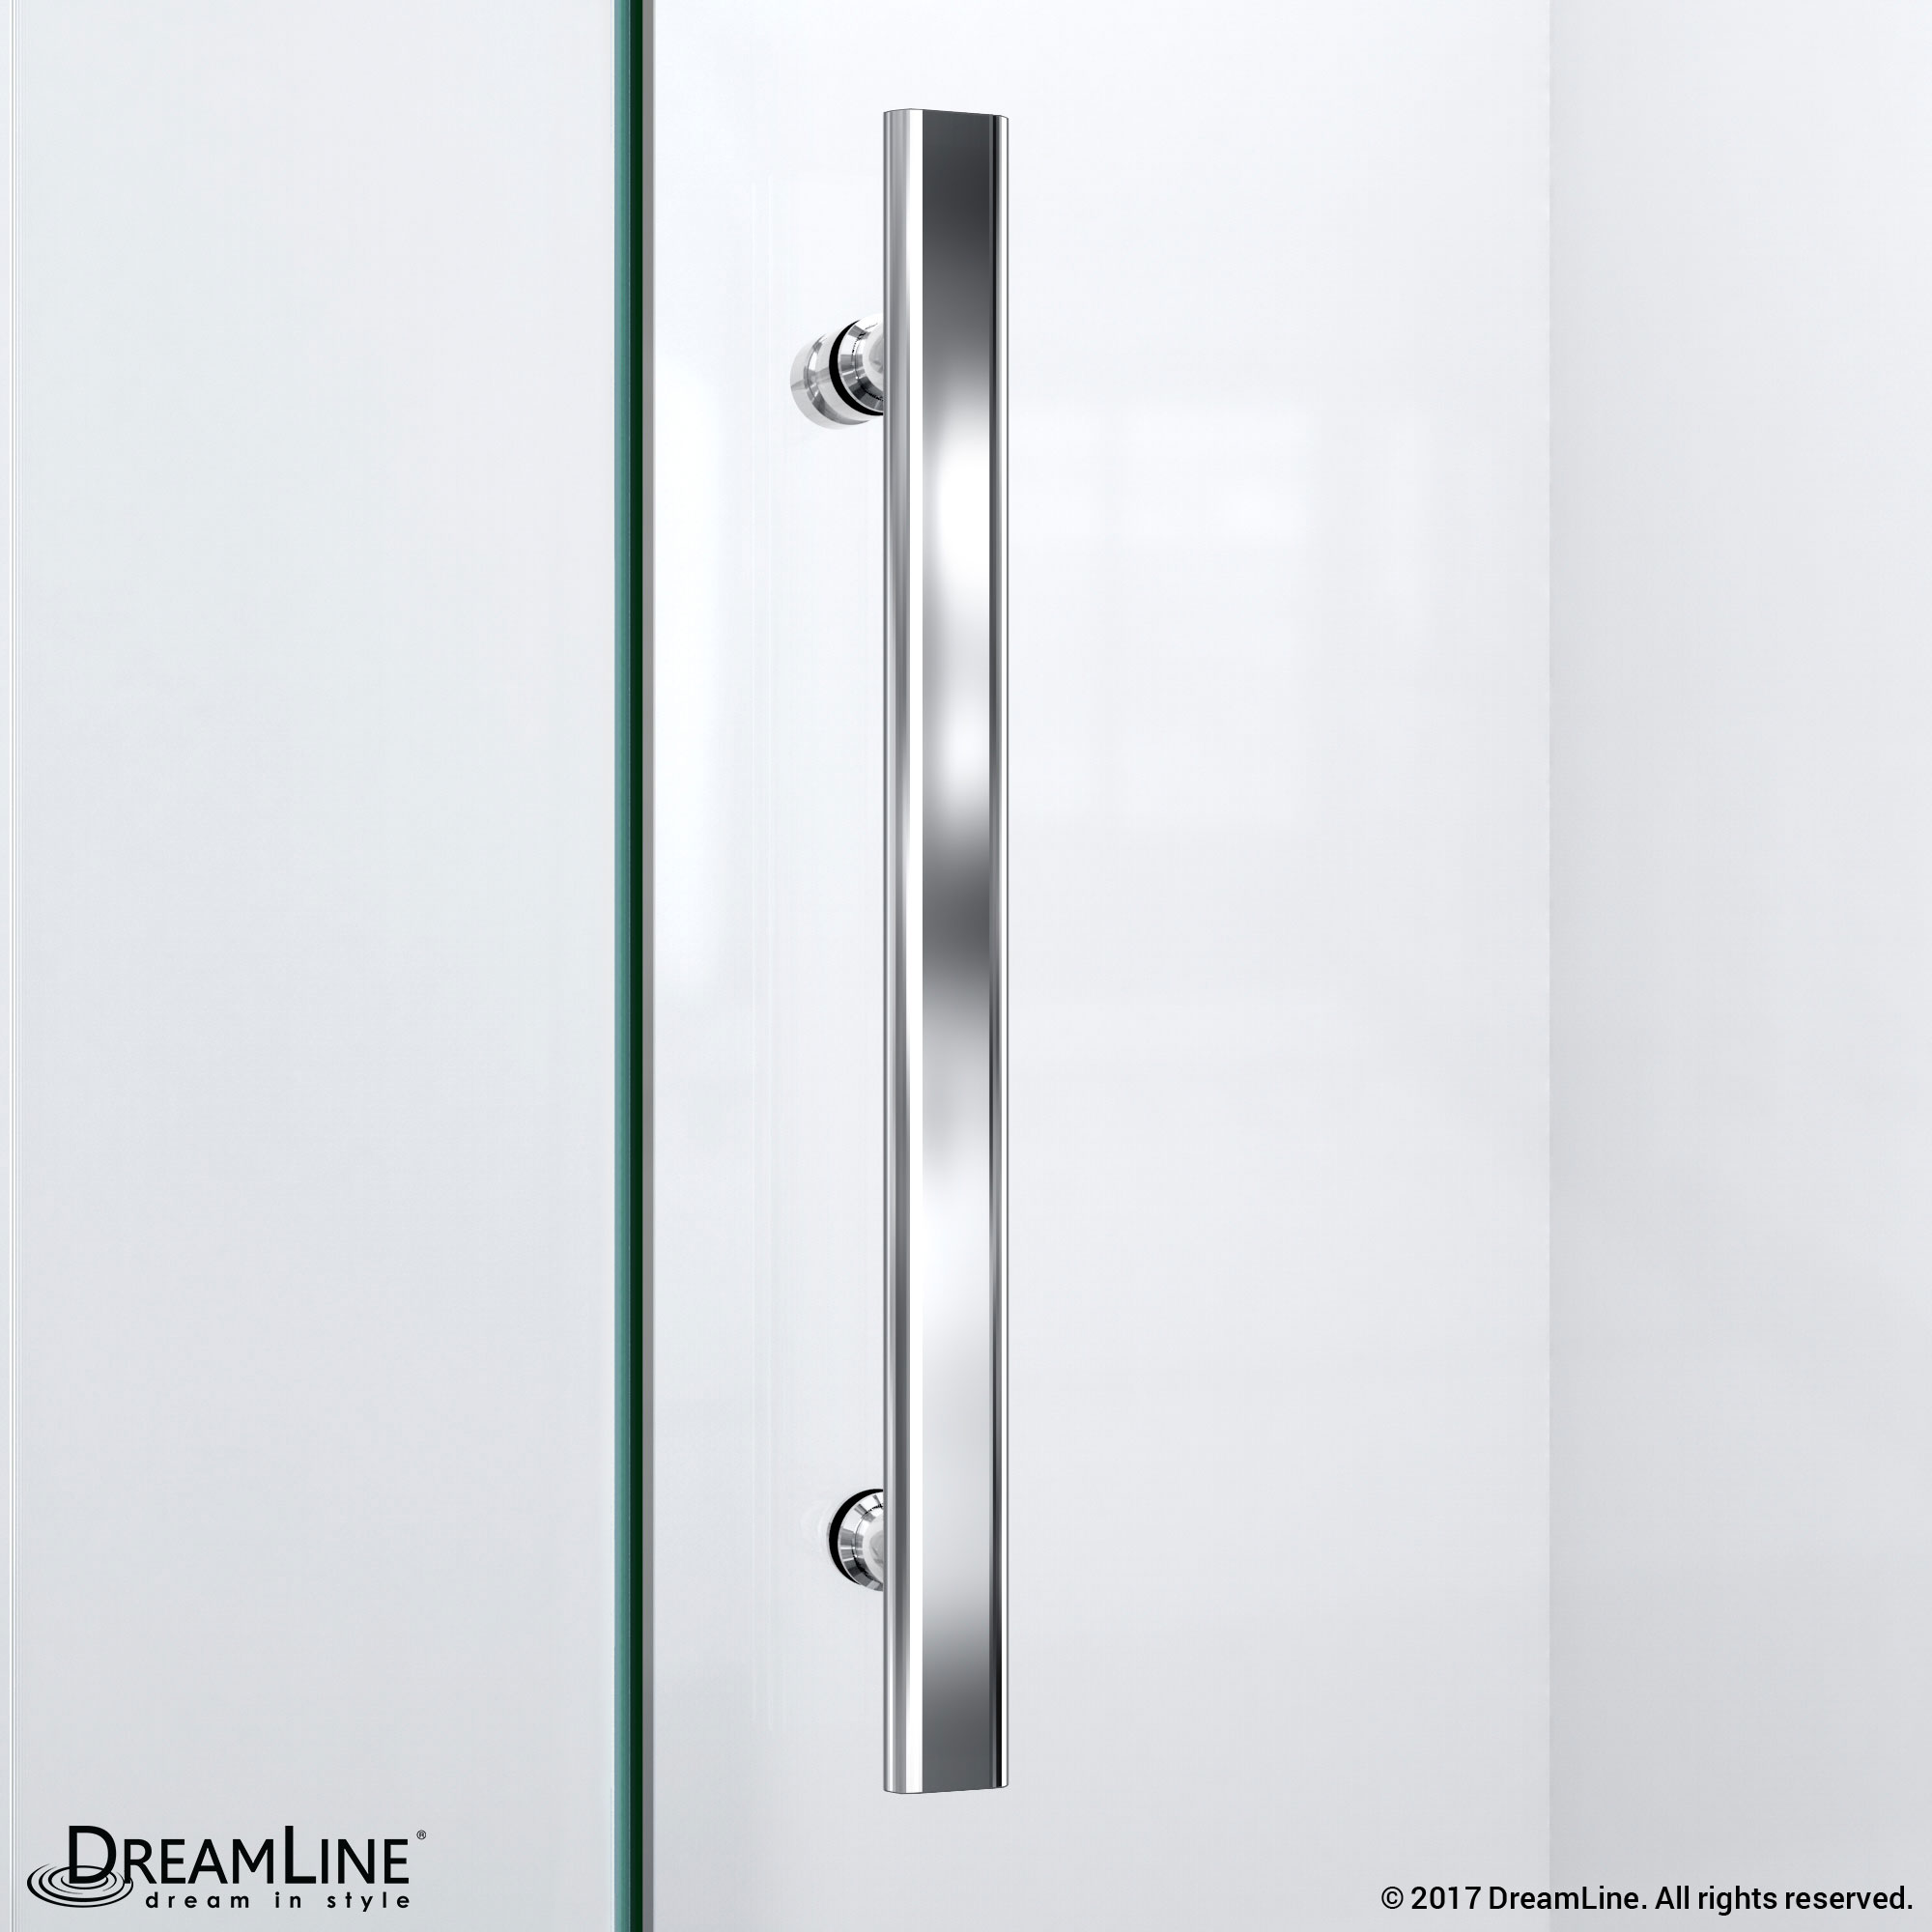 DreamLine Prism Lux 38 in. D x 38 in. W x 74 3/4 in. H Hinged Shower Enclosure in Chrome with Corner Drain Biscuit Base Kit